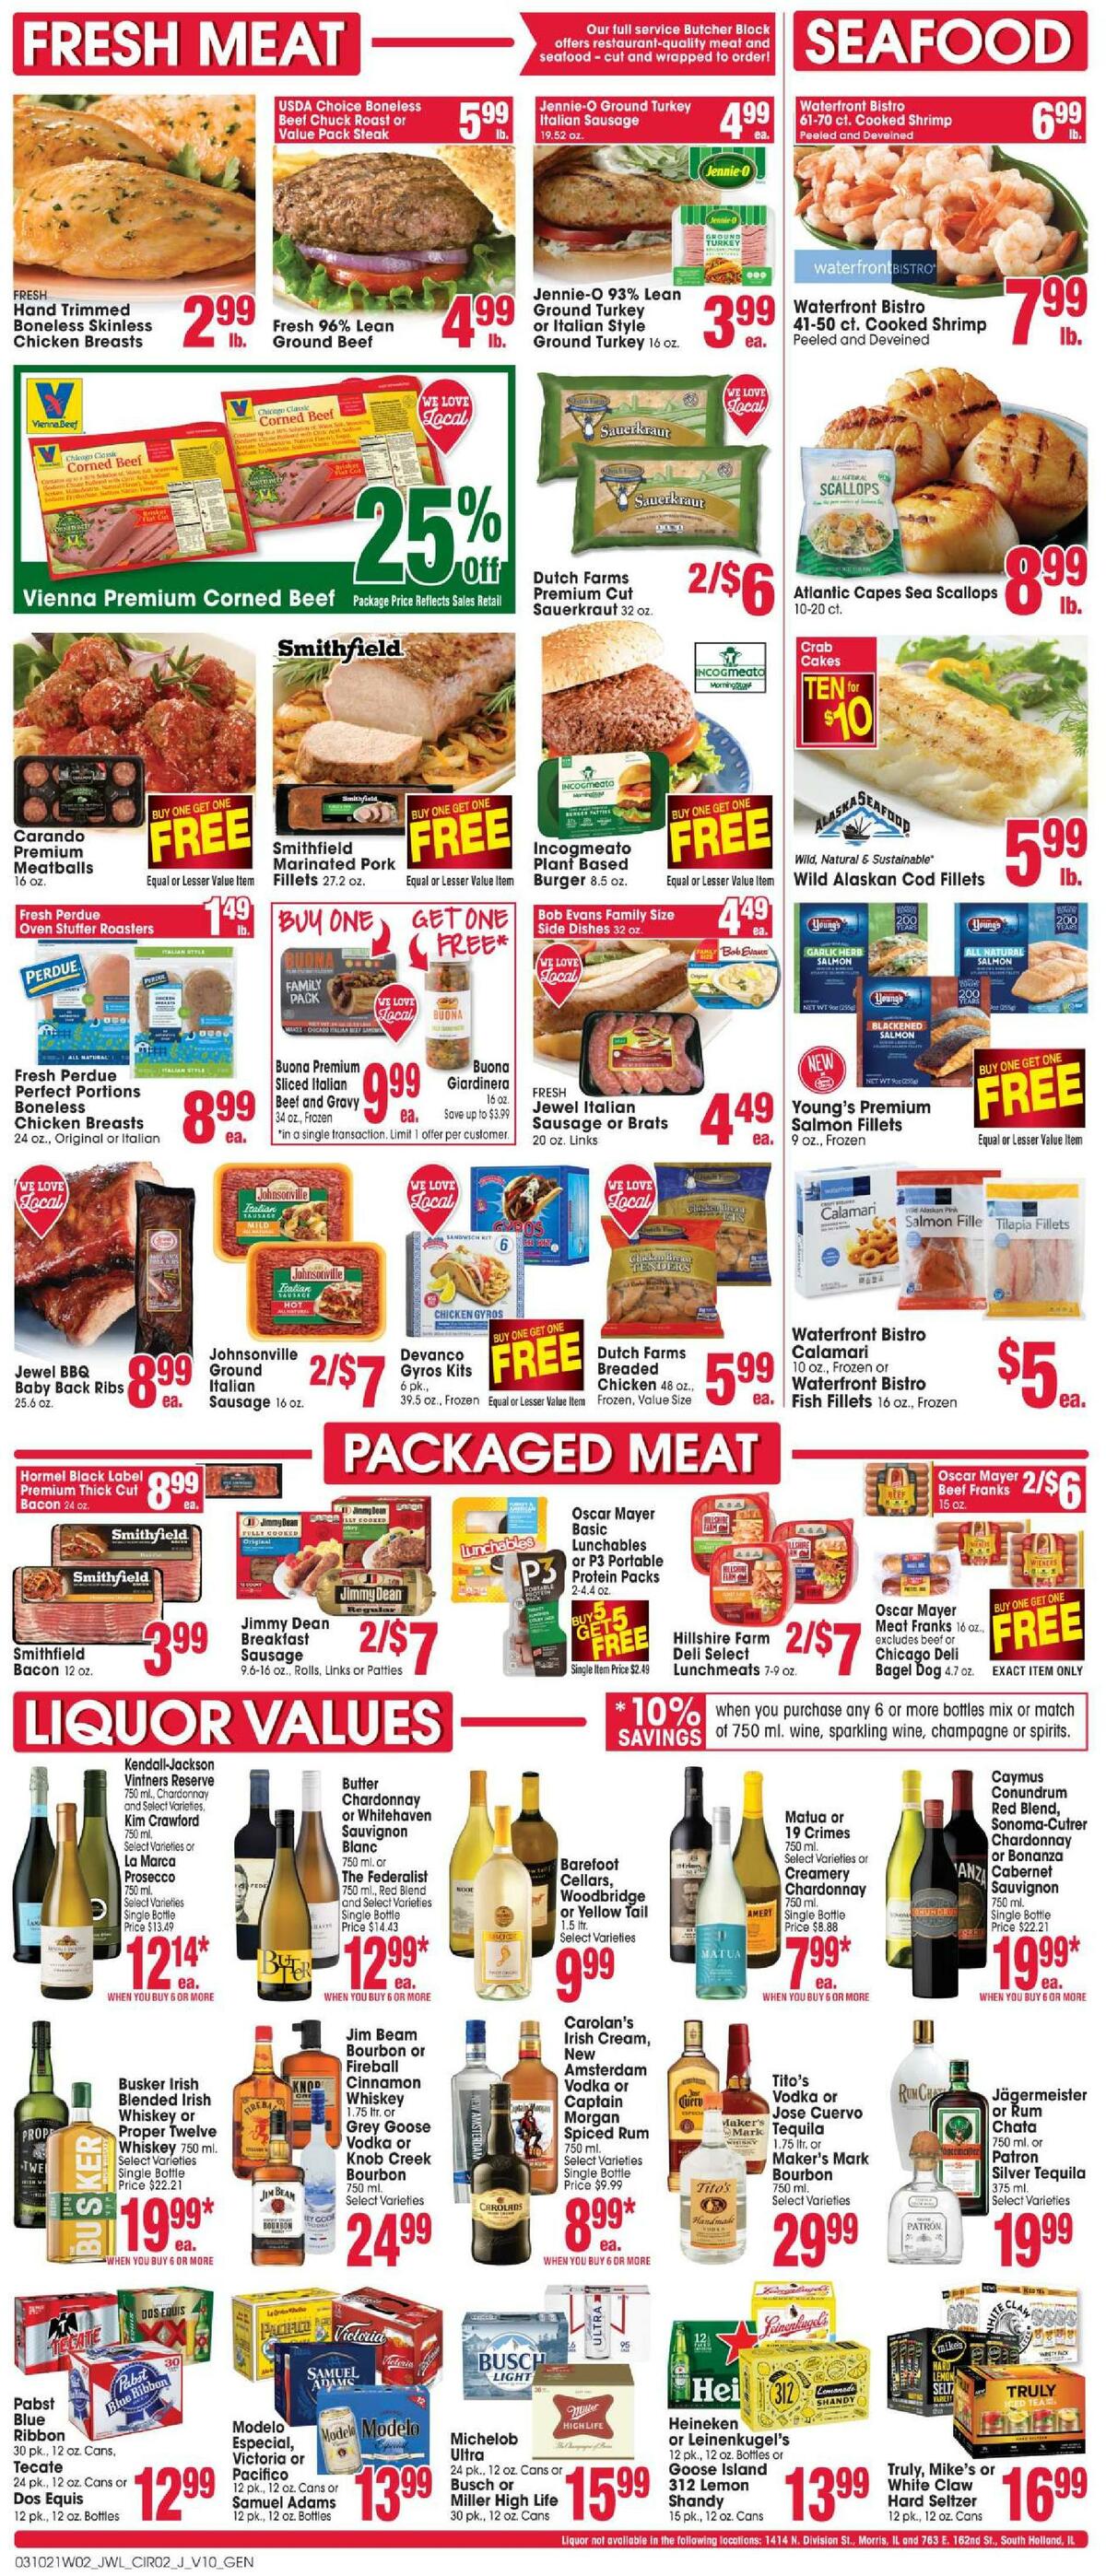 Jewel Osco Weekly Ad from March 10